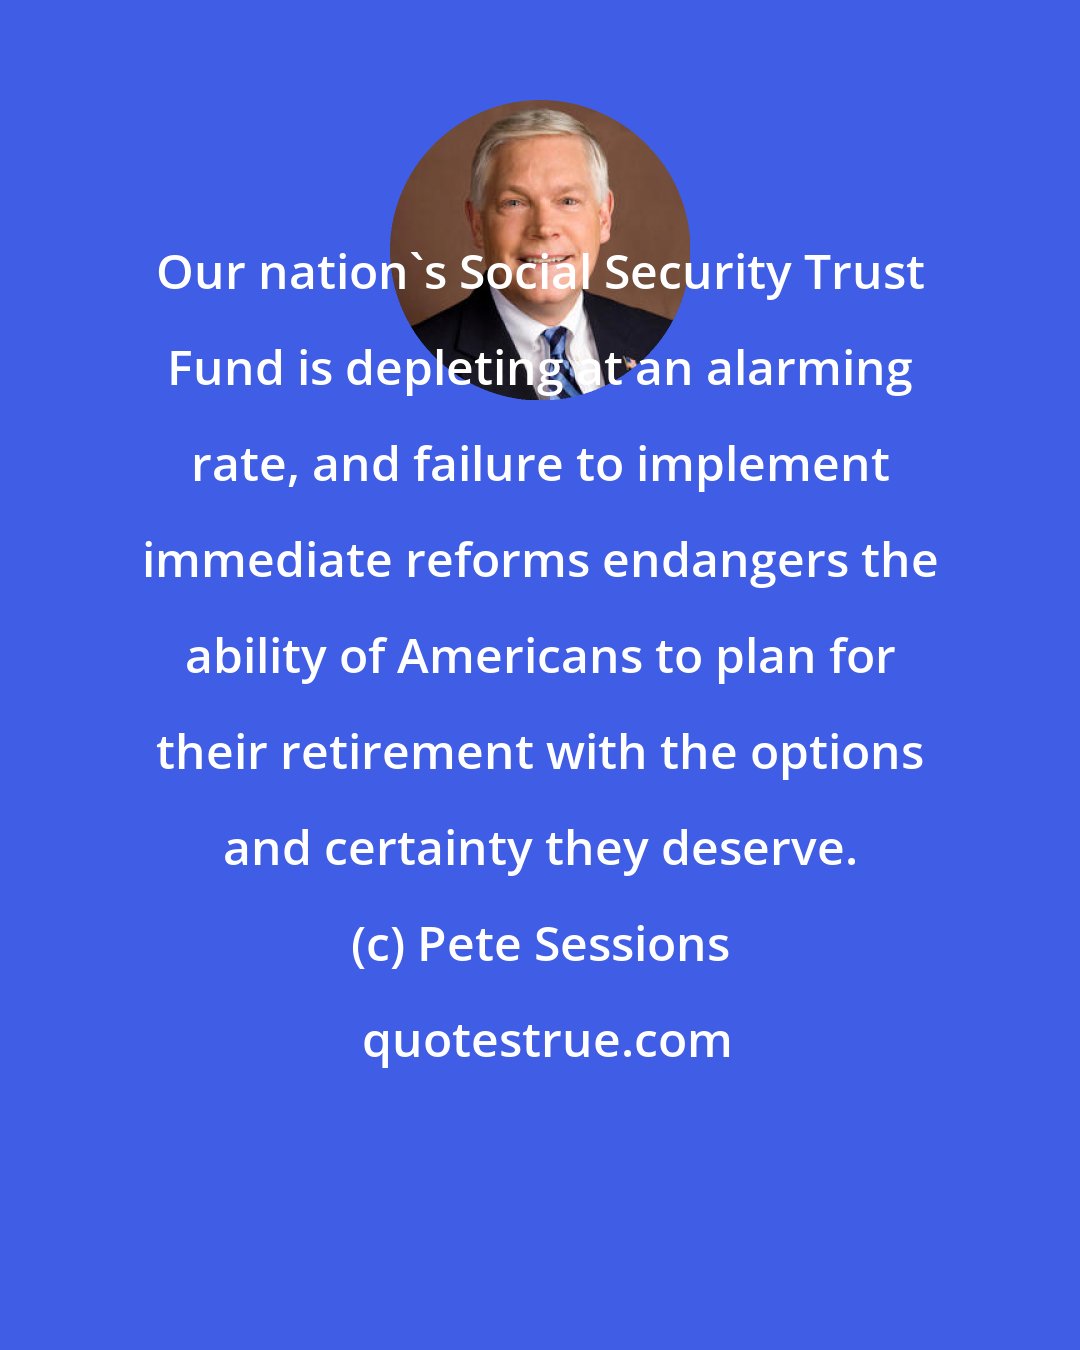 Pete Sessions: Our nation's Social Security Trust Fund is depleting at an alarming rate, and failure to implement immediate reforms endangers the ability of Americans to plan for their retirement with the options and certainty they deserve.